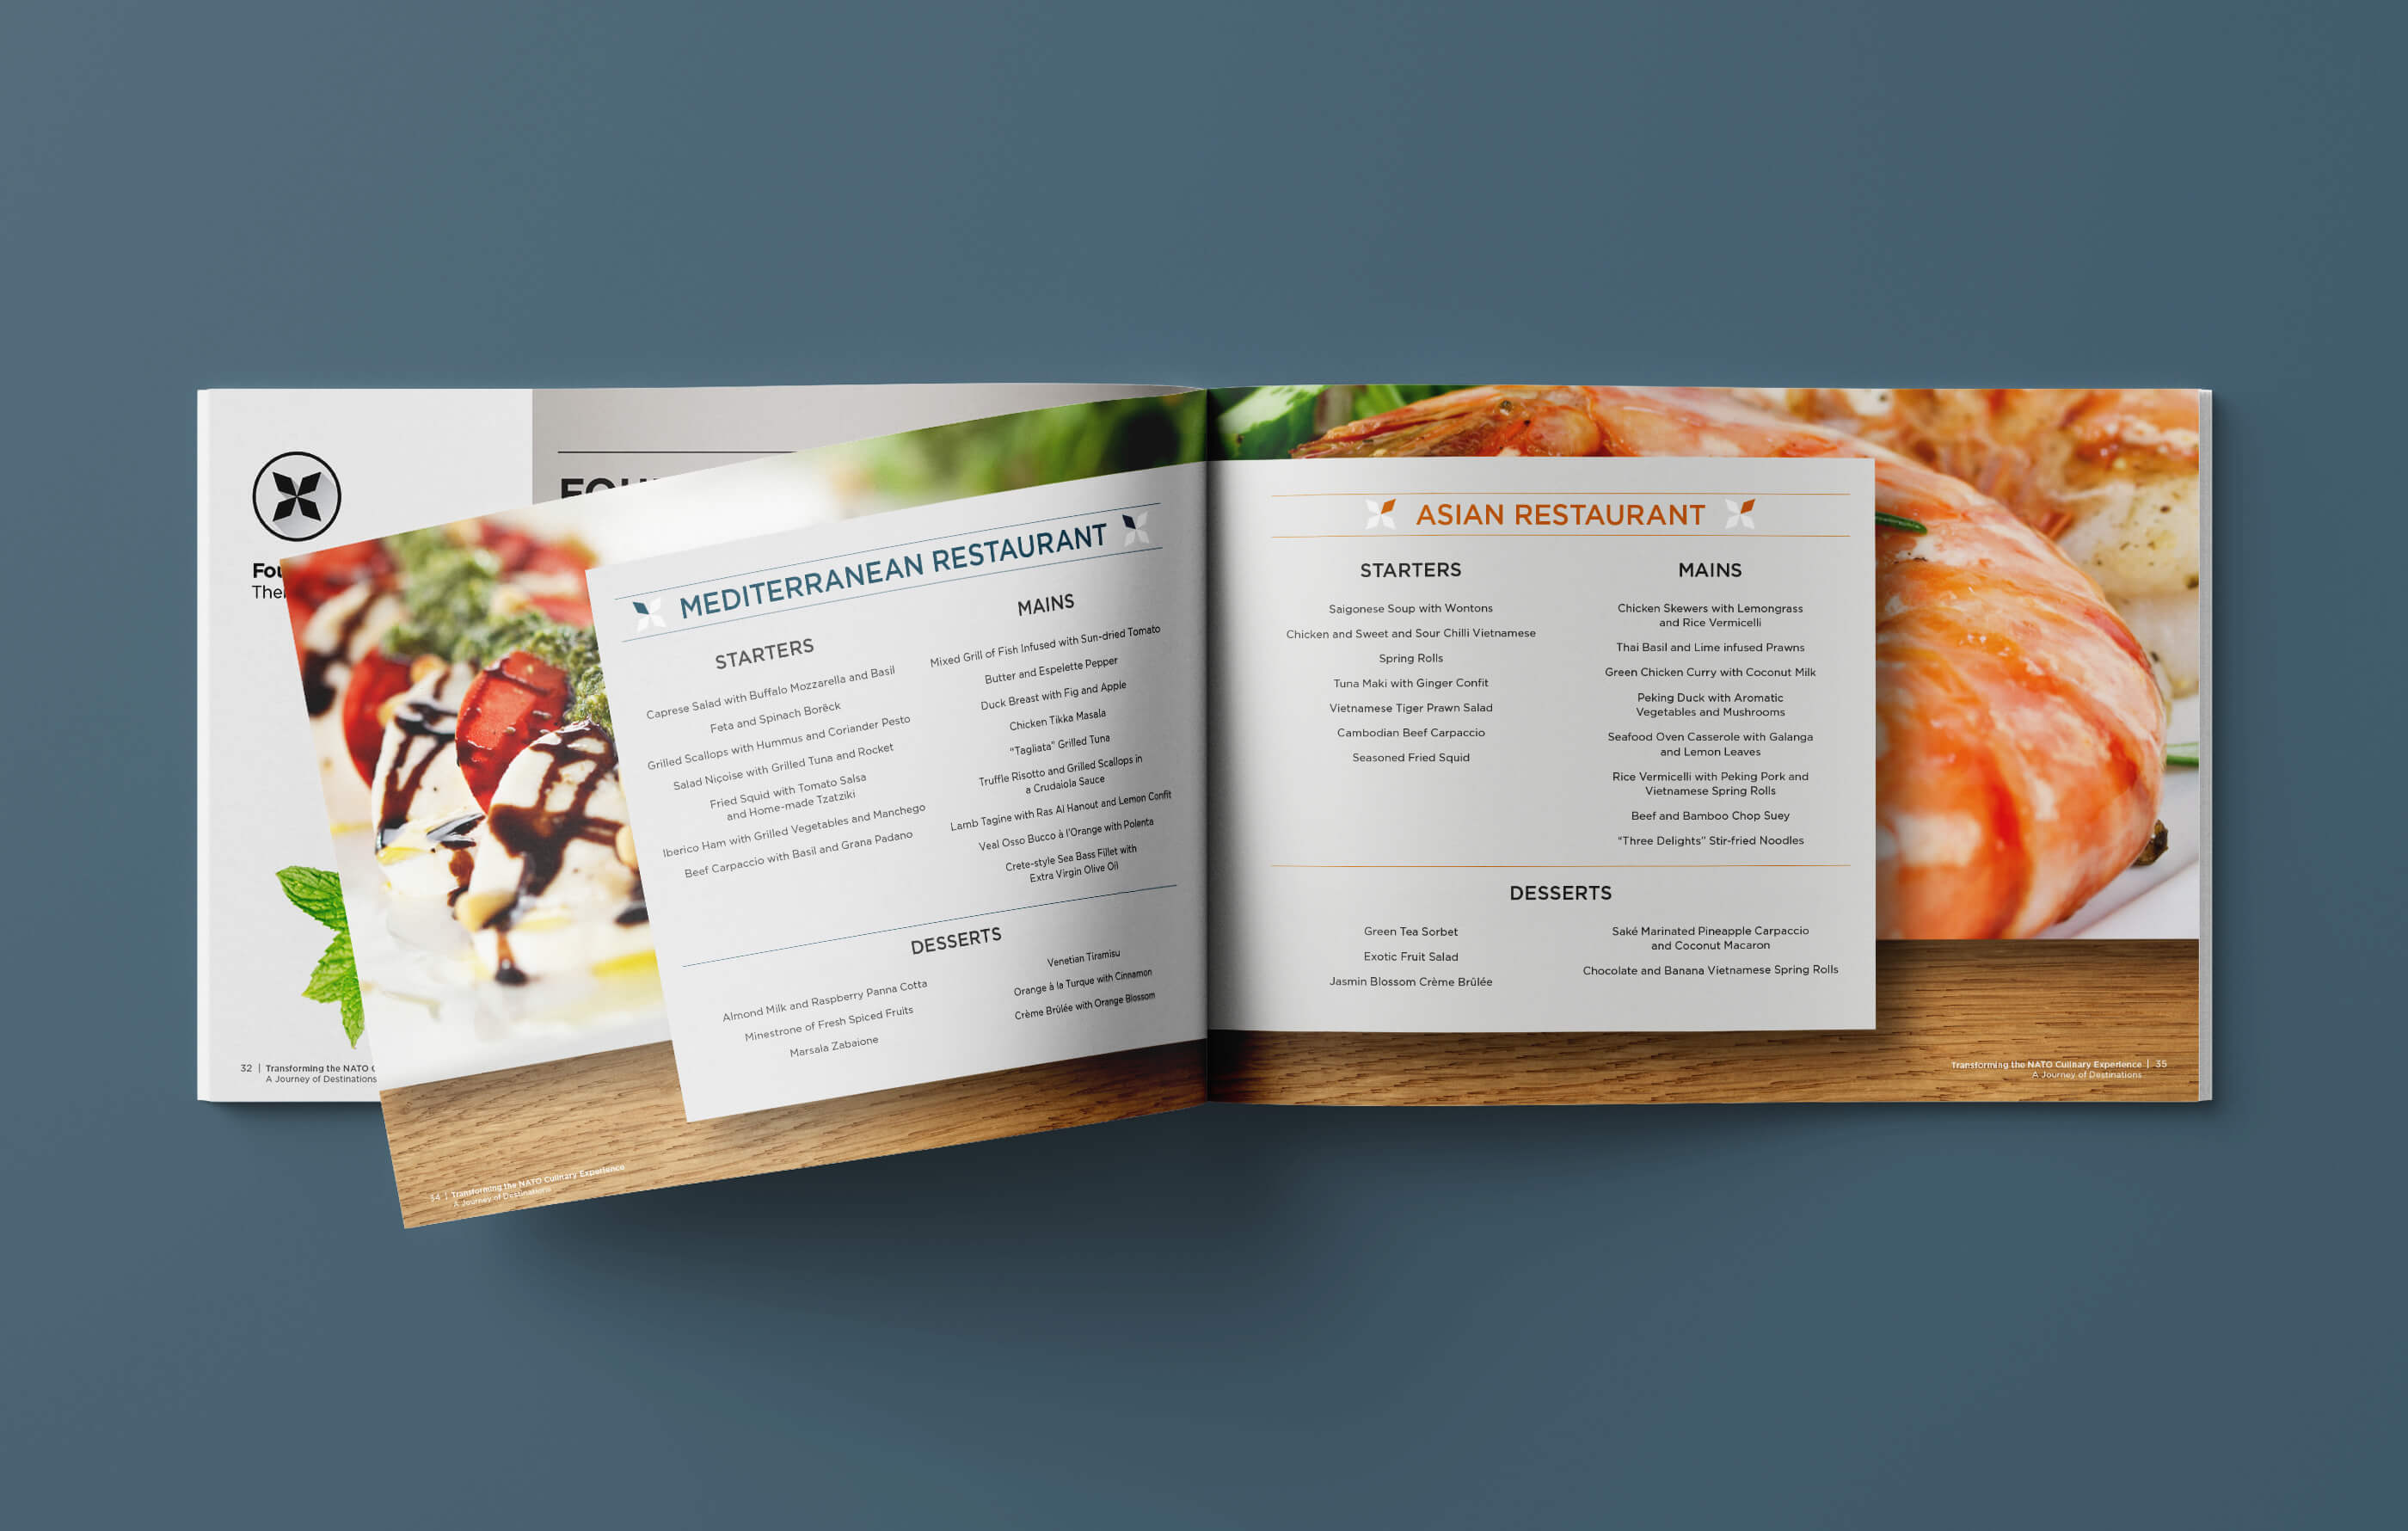 Menus for the Mediterranean and Asian restaurants at the Four Seasons, placed above vibrant images of a tomato salad and king prawns